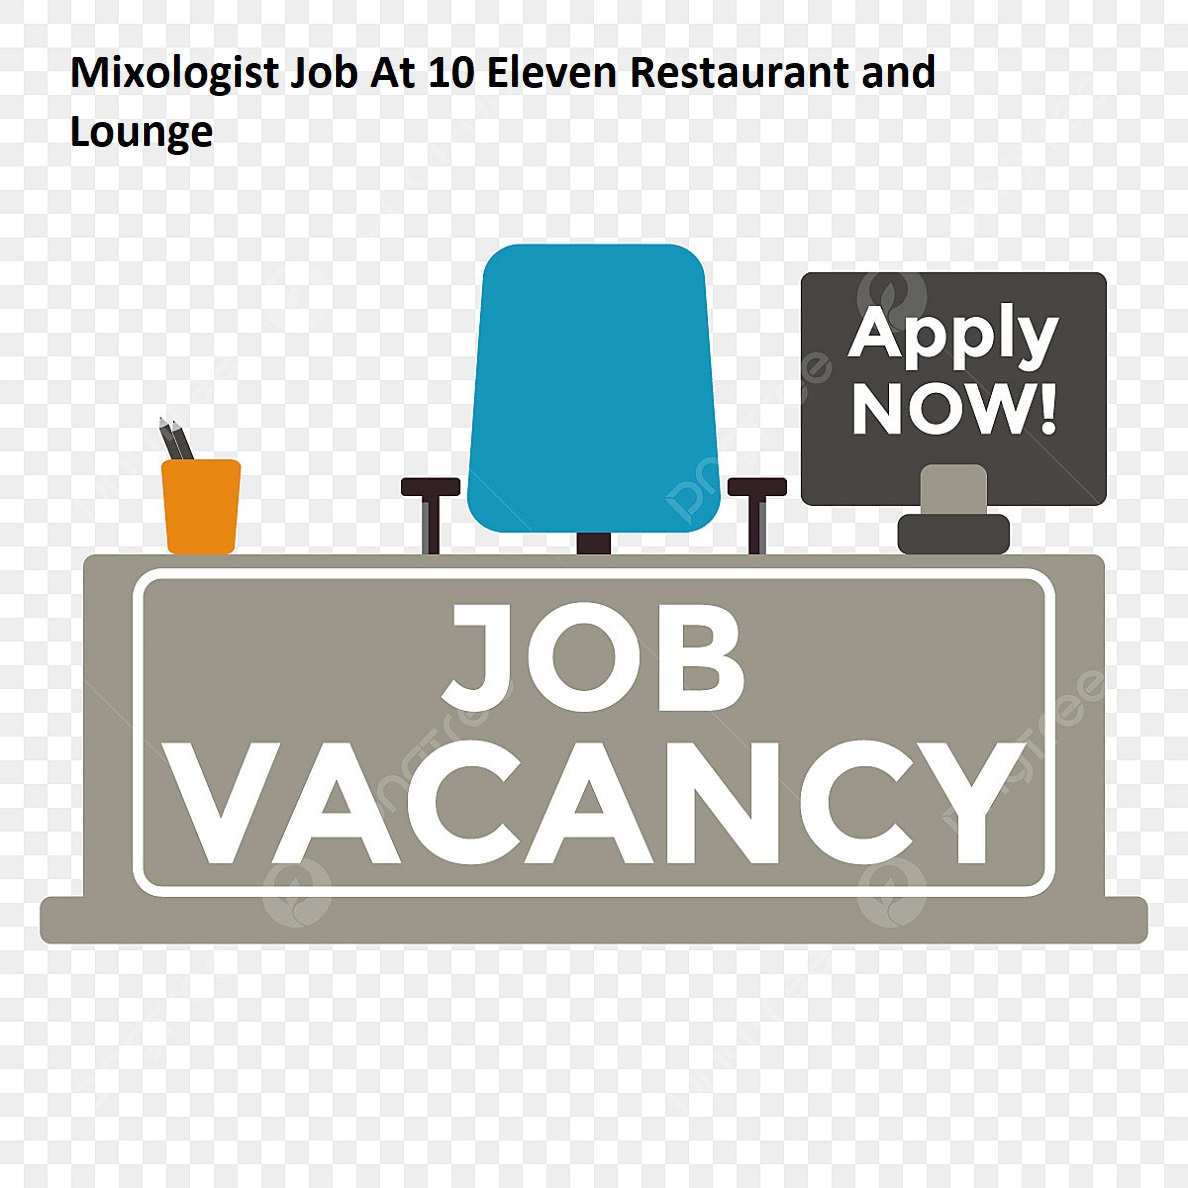 Vacancy: Mixologist Job At 10 Eleven Restaurant and Lounge 